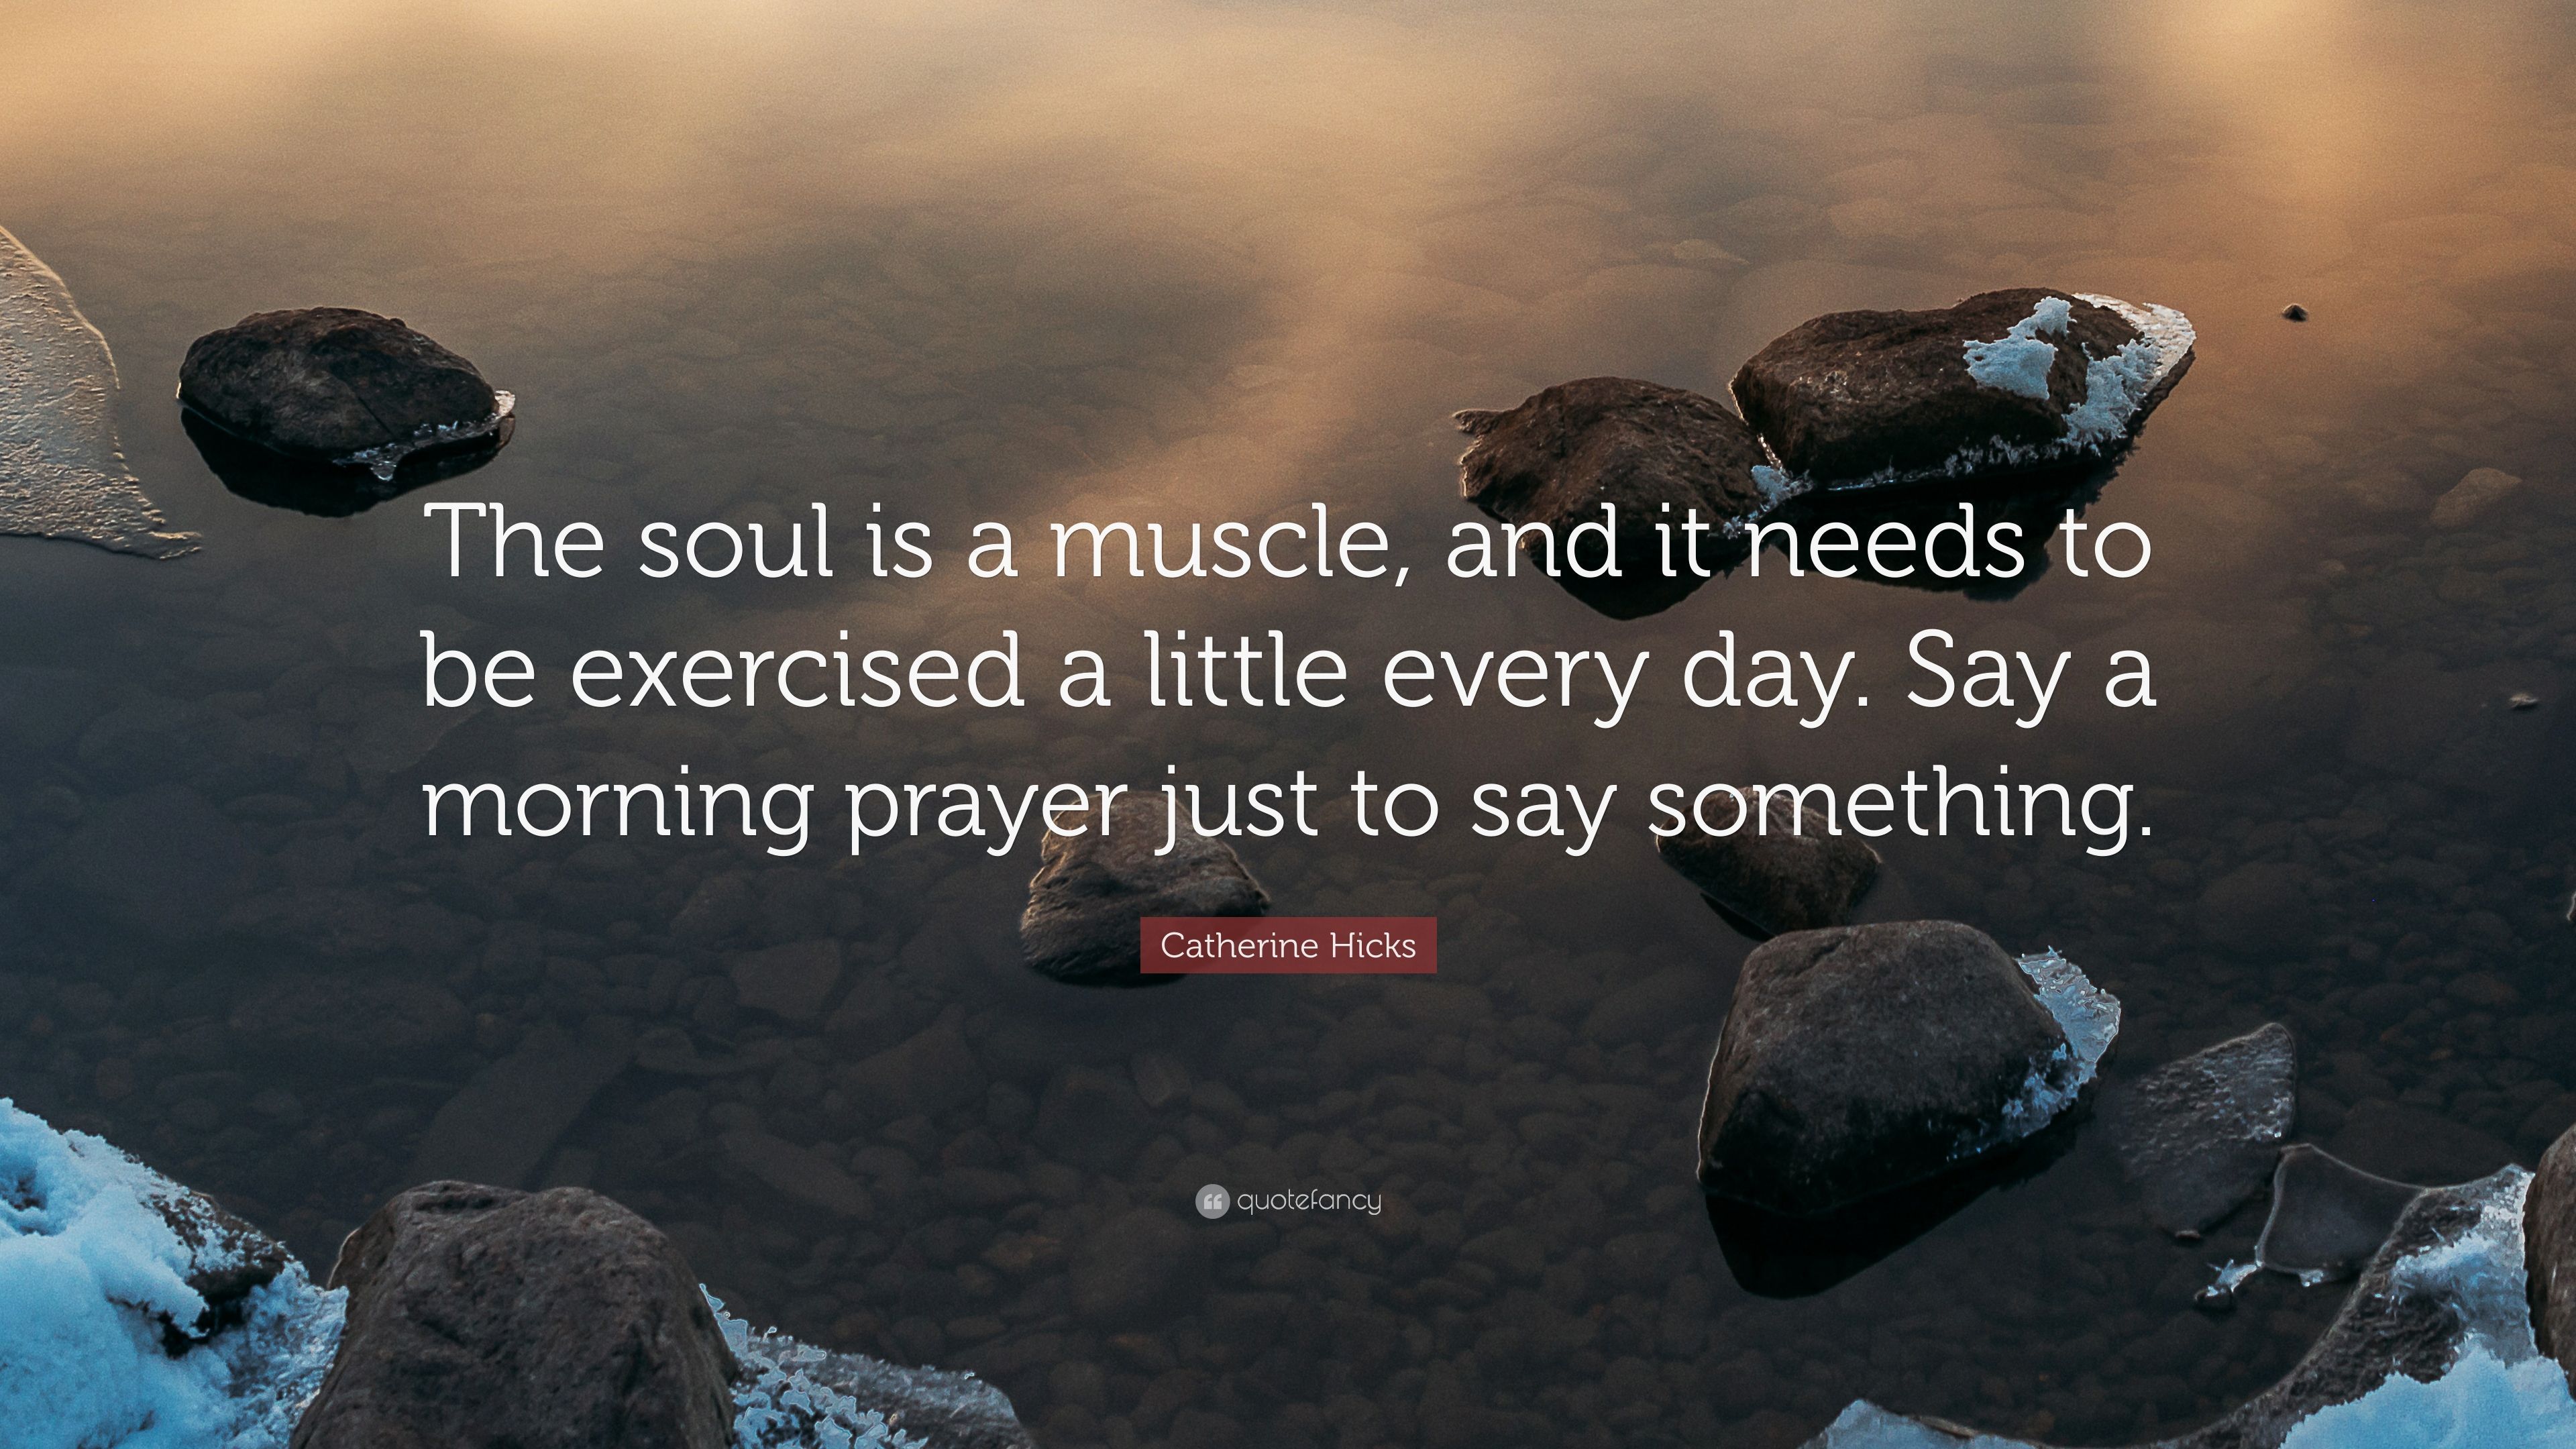 Catherine Hicks Quote: “The soul is a muscle, and it needs to be